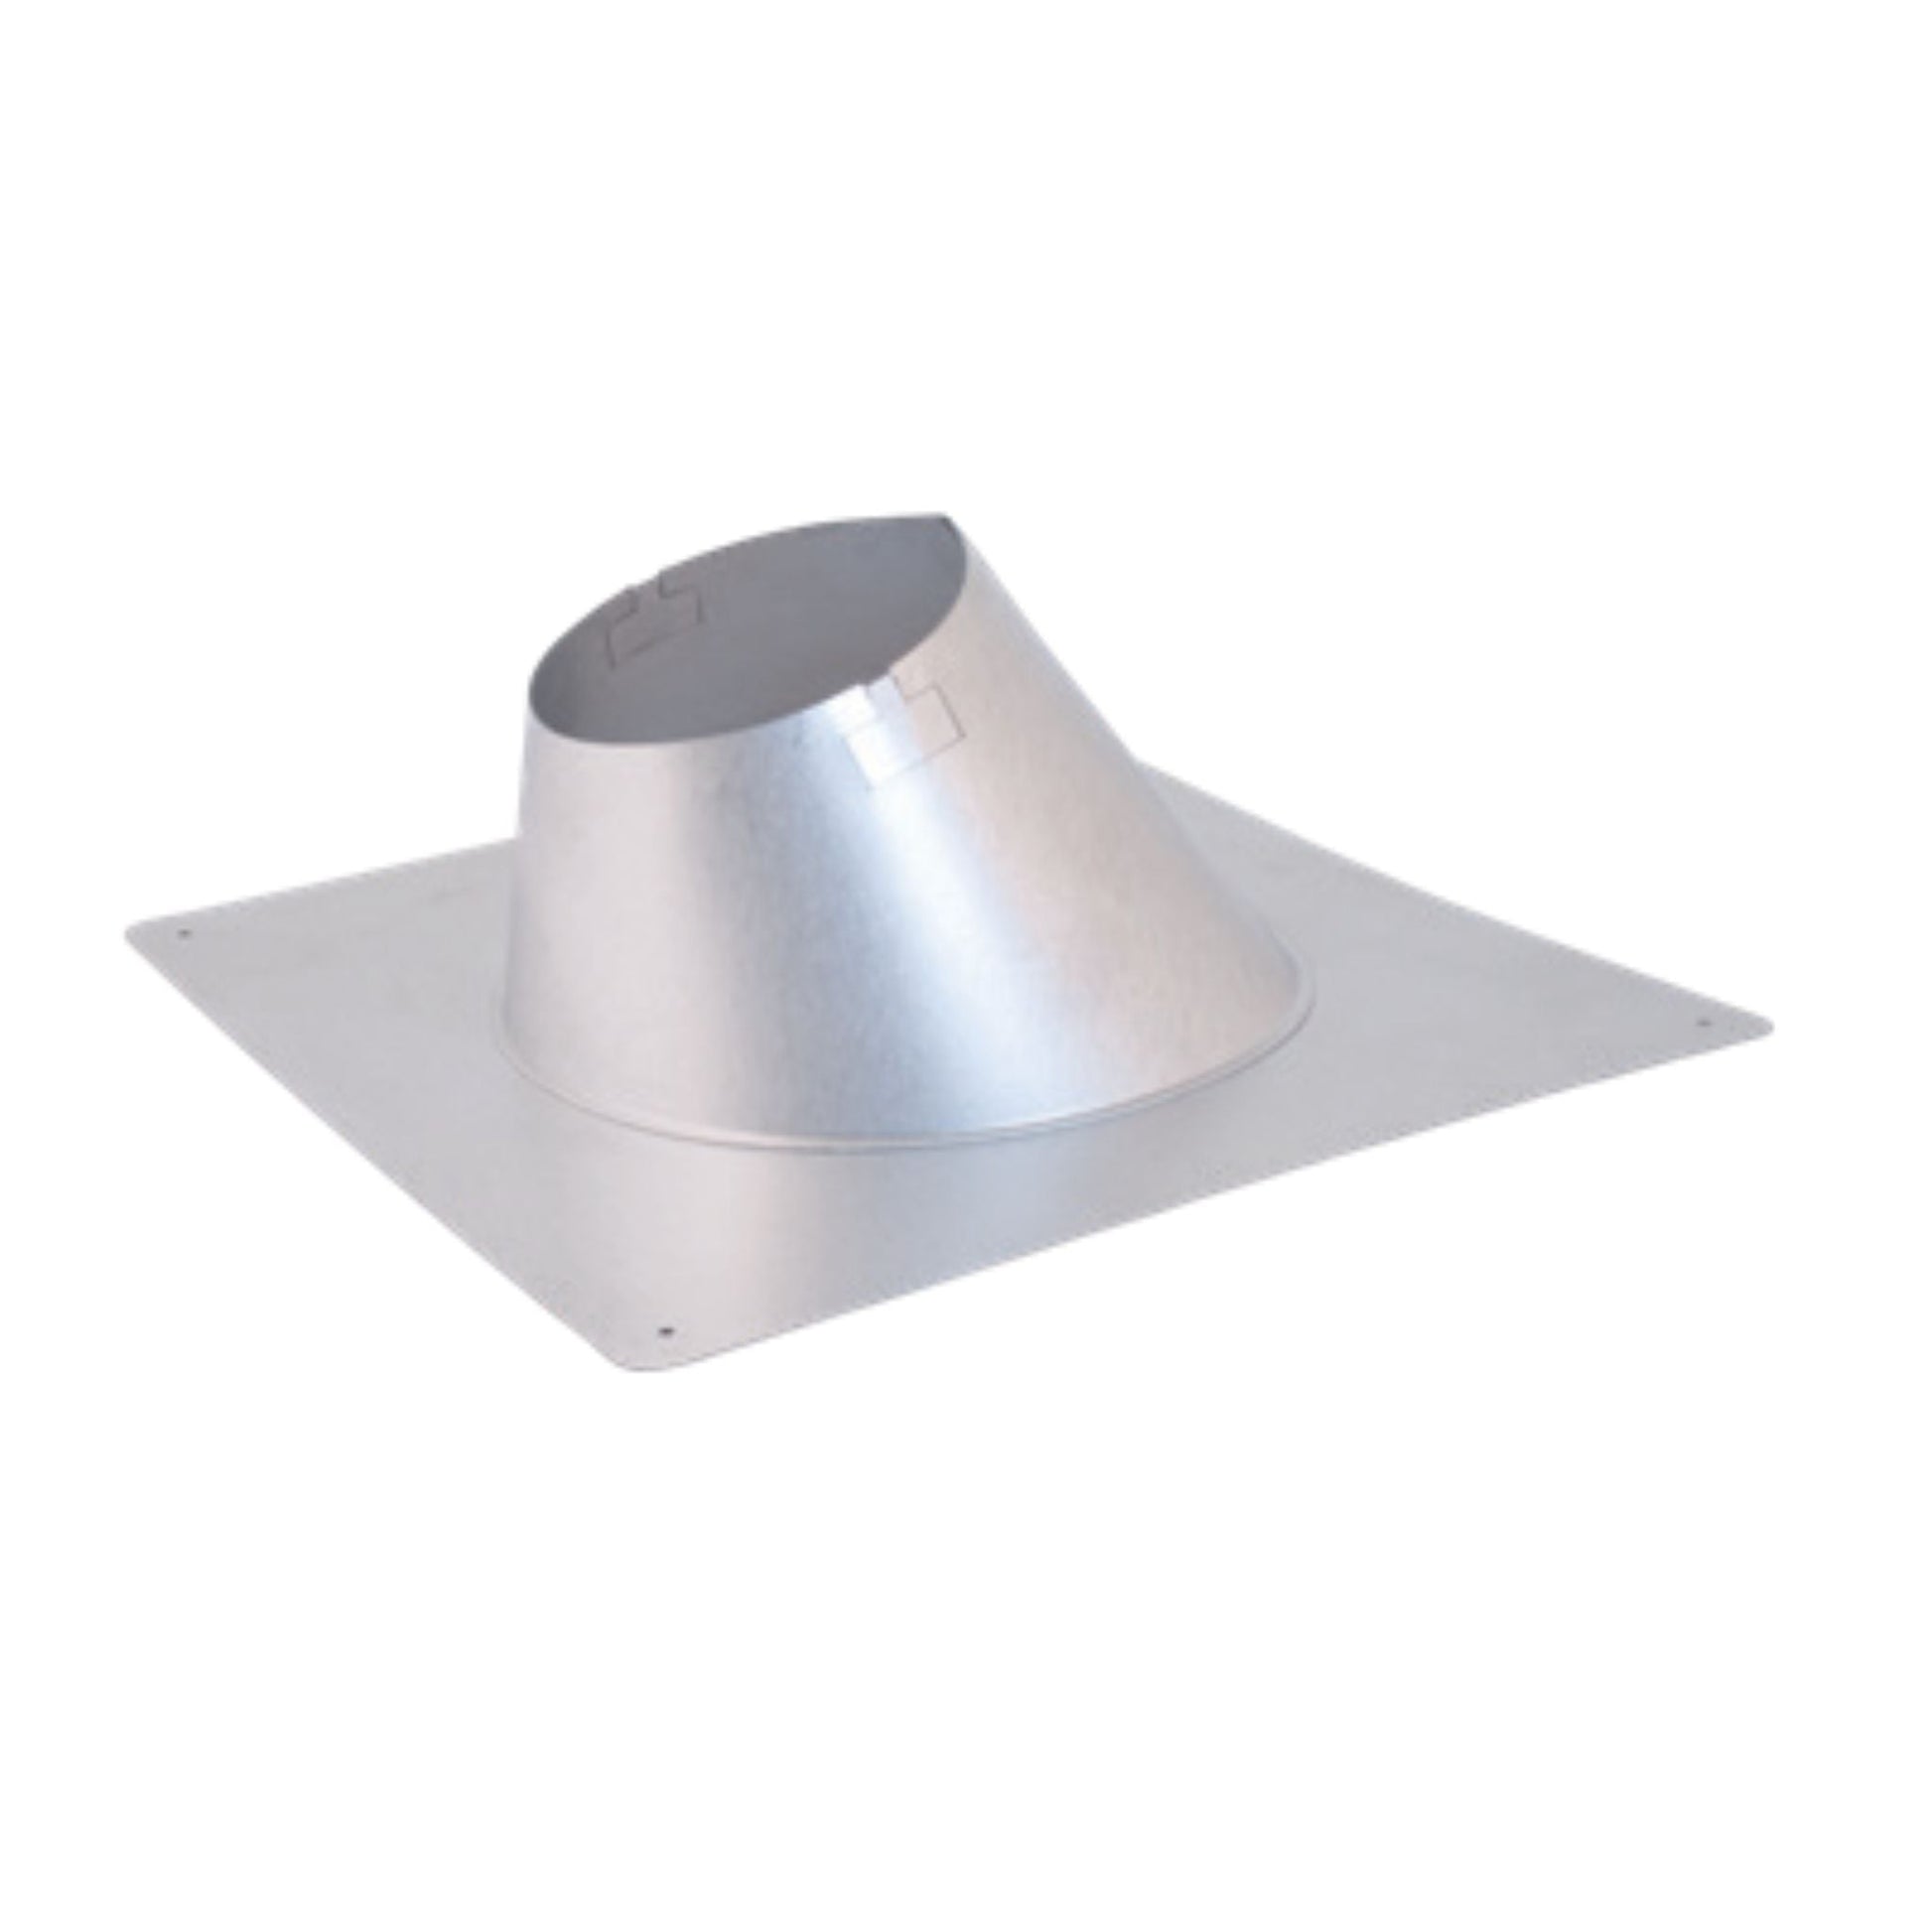 DuraVent Concentric Vent System 3" x 5" 0/12 - 12/12 Pitch Adjustable Roof Flashing